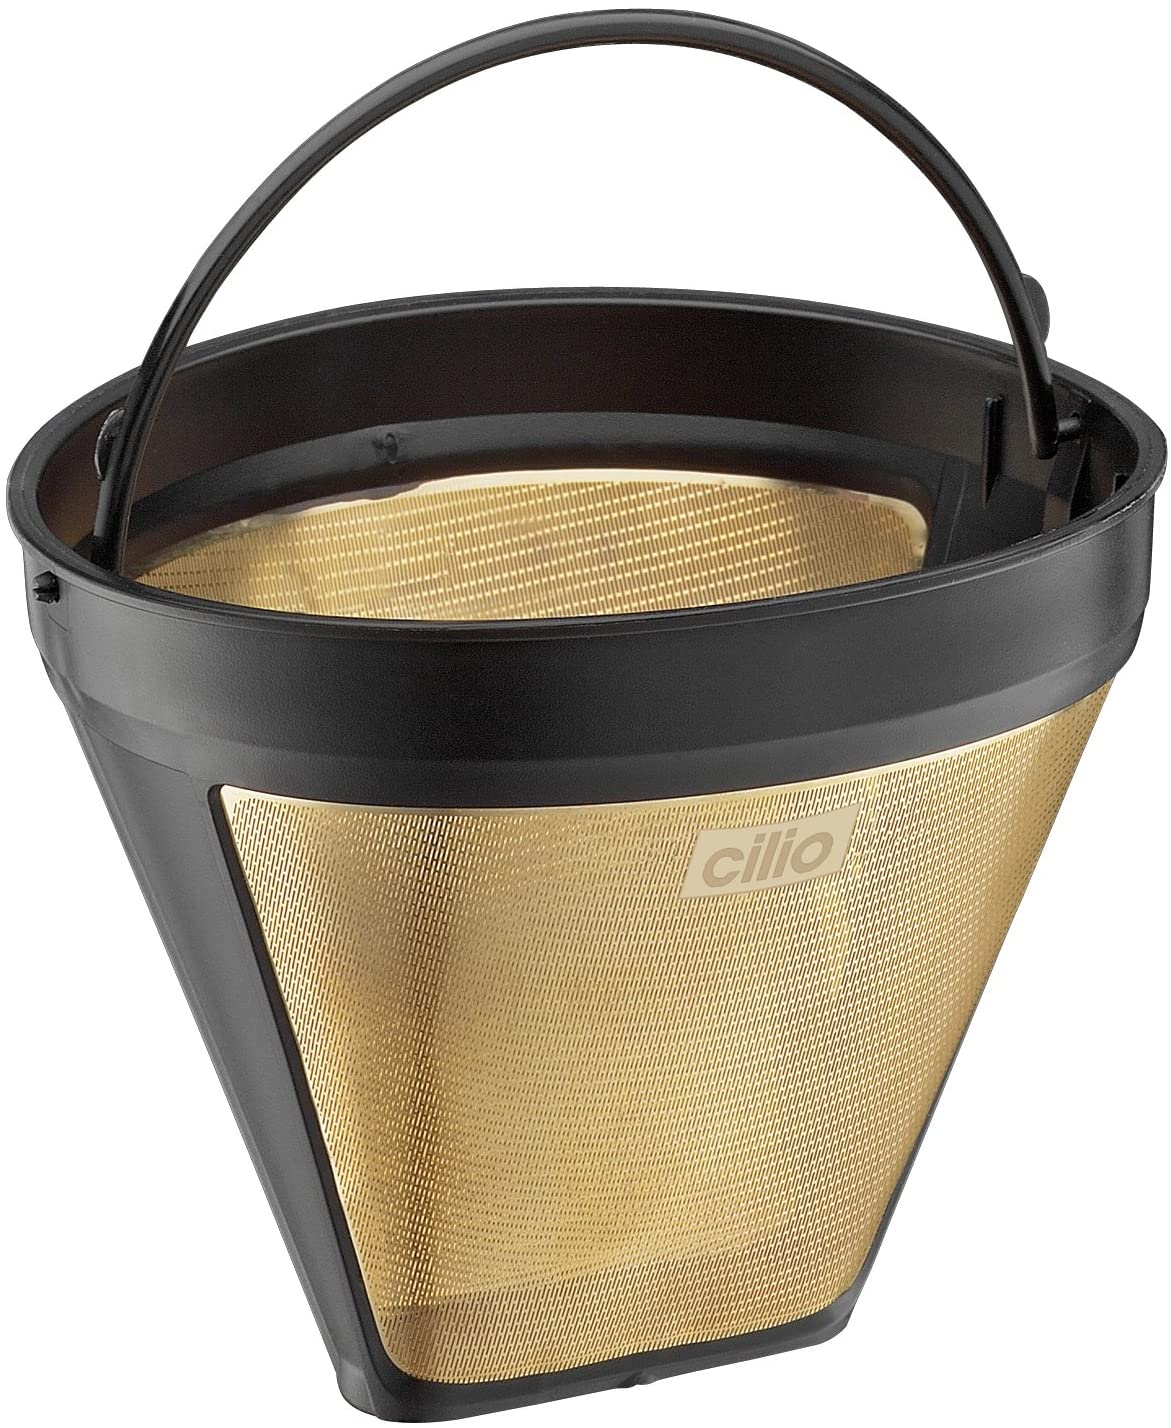 Cilio C116007 Coffee Filter Size 4 Gold, one